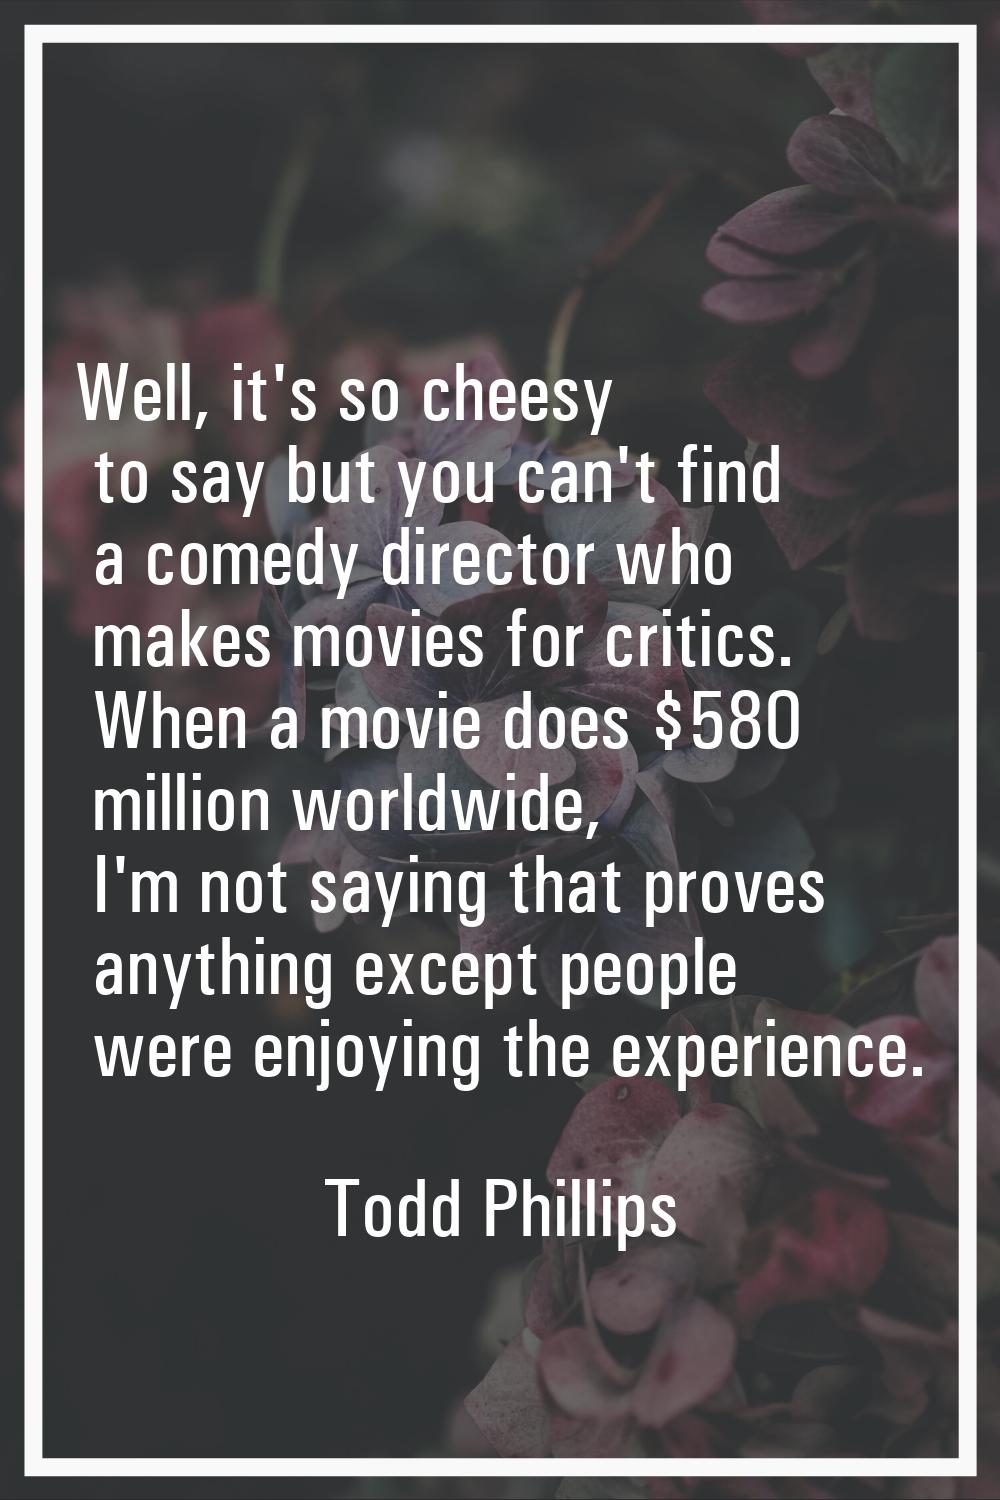 Well, it's so cheesy to say but you can't find a comedy director who makes movies for critics. When